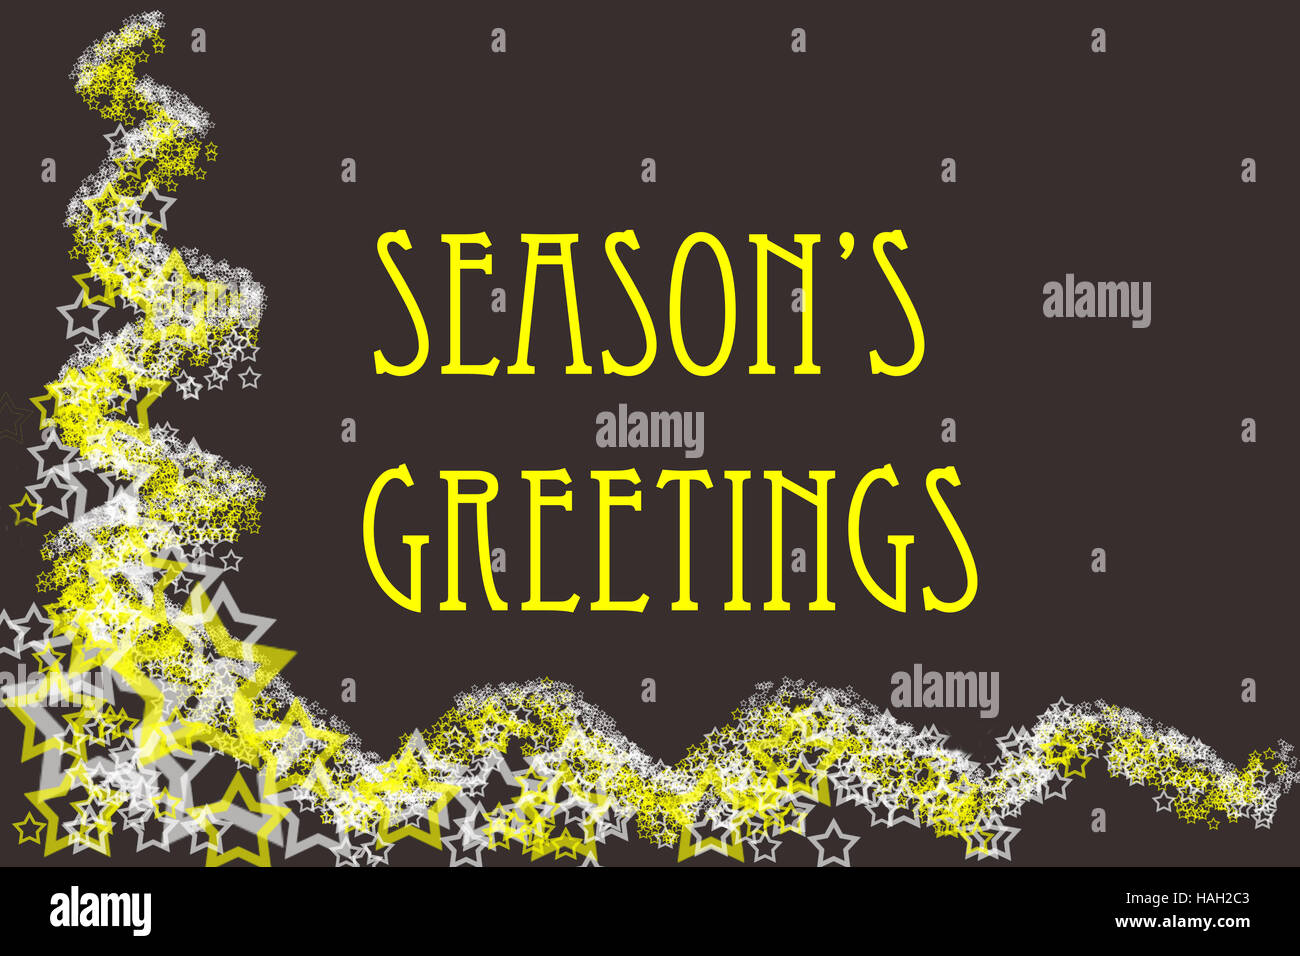 Stylish, simple, Season's Greetings background with dark chocolate brown and yellow/gold sprinkled stars in the corner Stock Photo